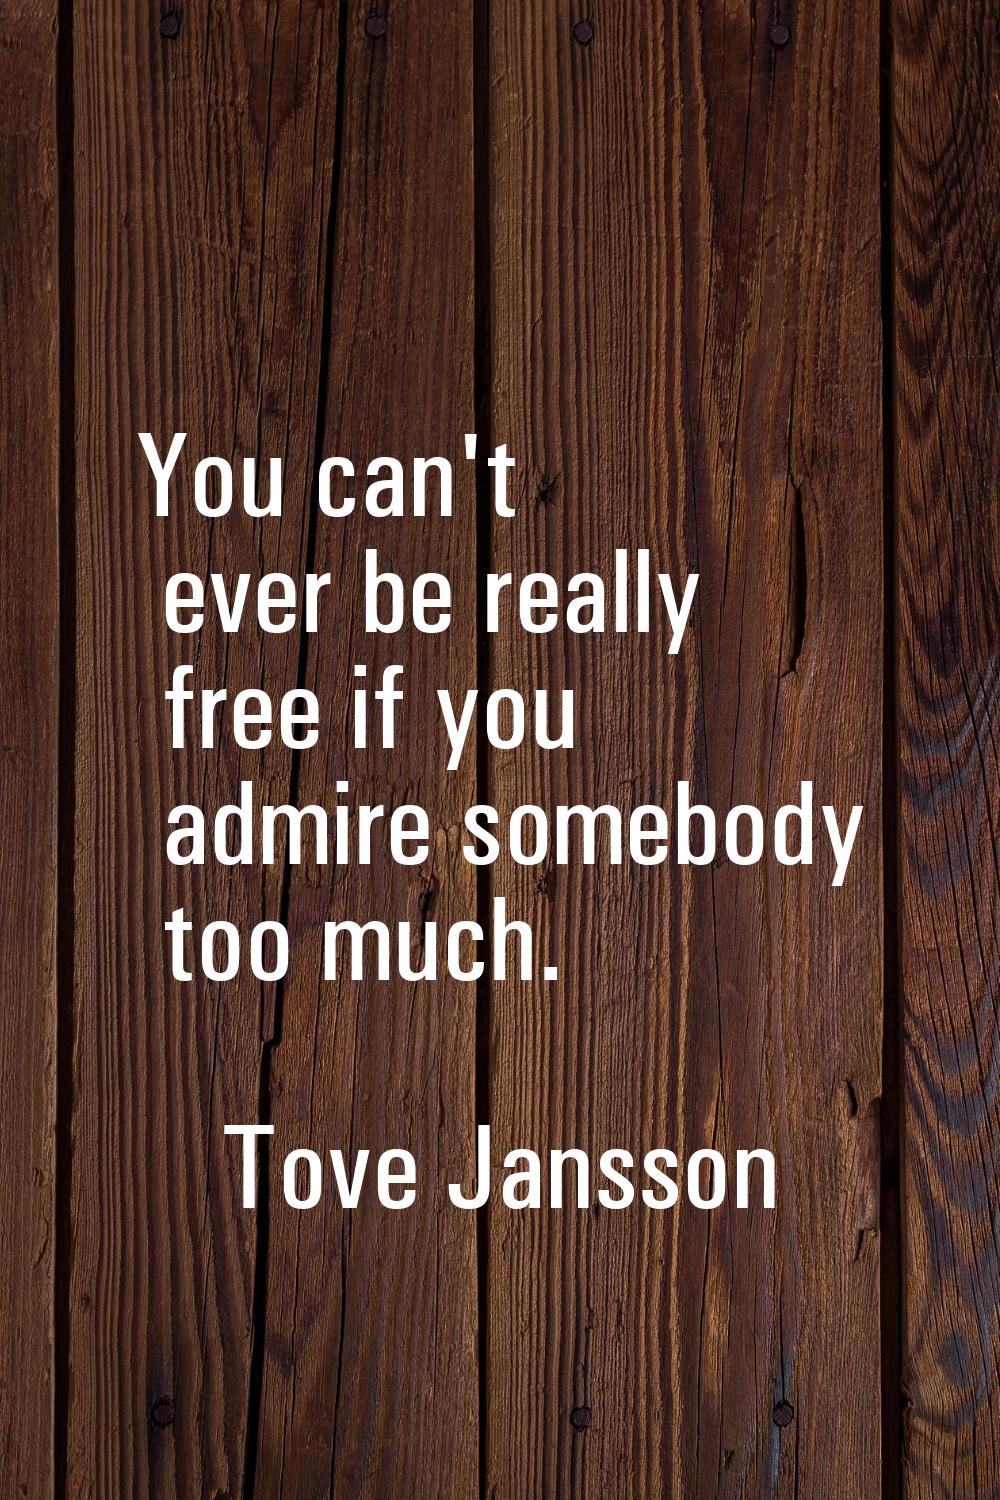 You can't ever be really free if you admire somebody too much.